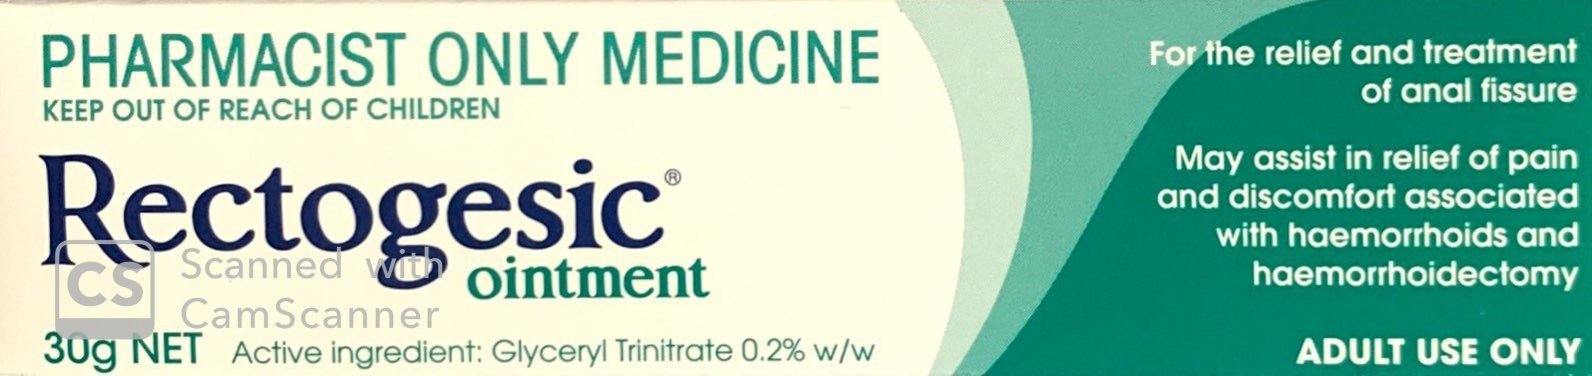 Rectogesic Ointment For Relief &amp; Treatment Of Anal Fissure 30g - Pharmacist Only Medicine